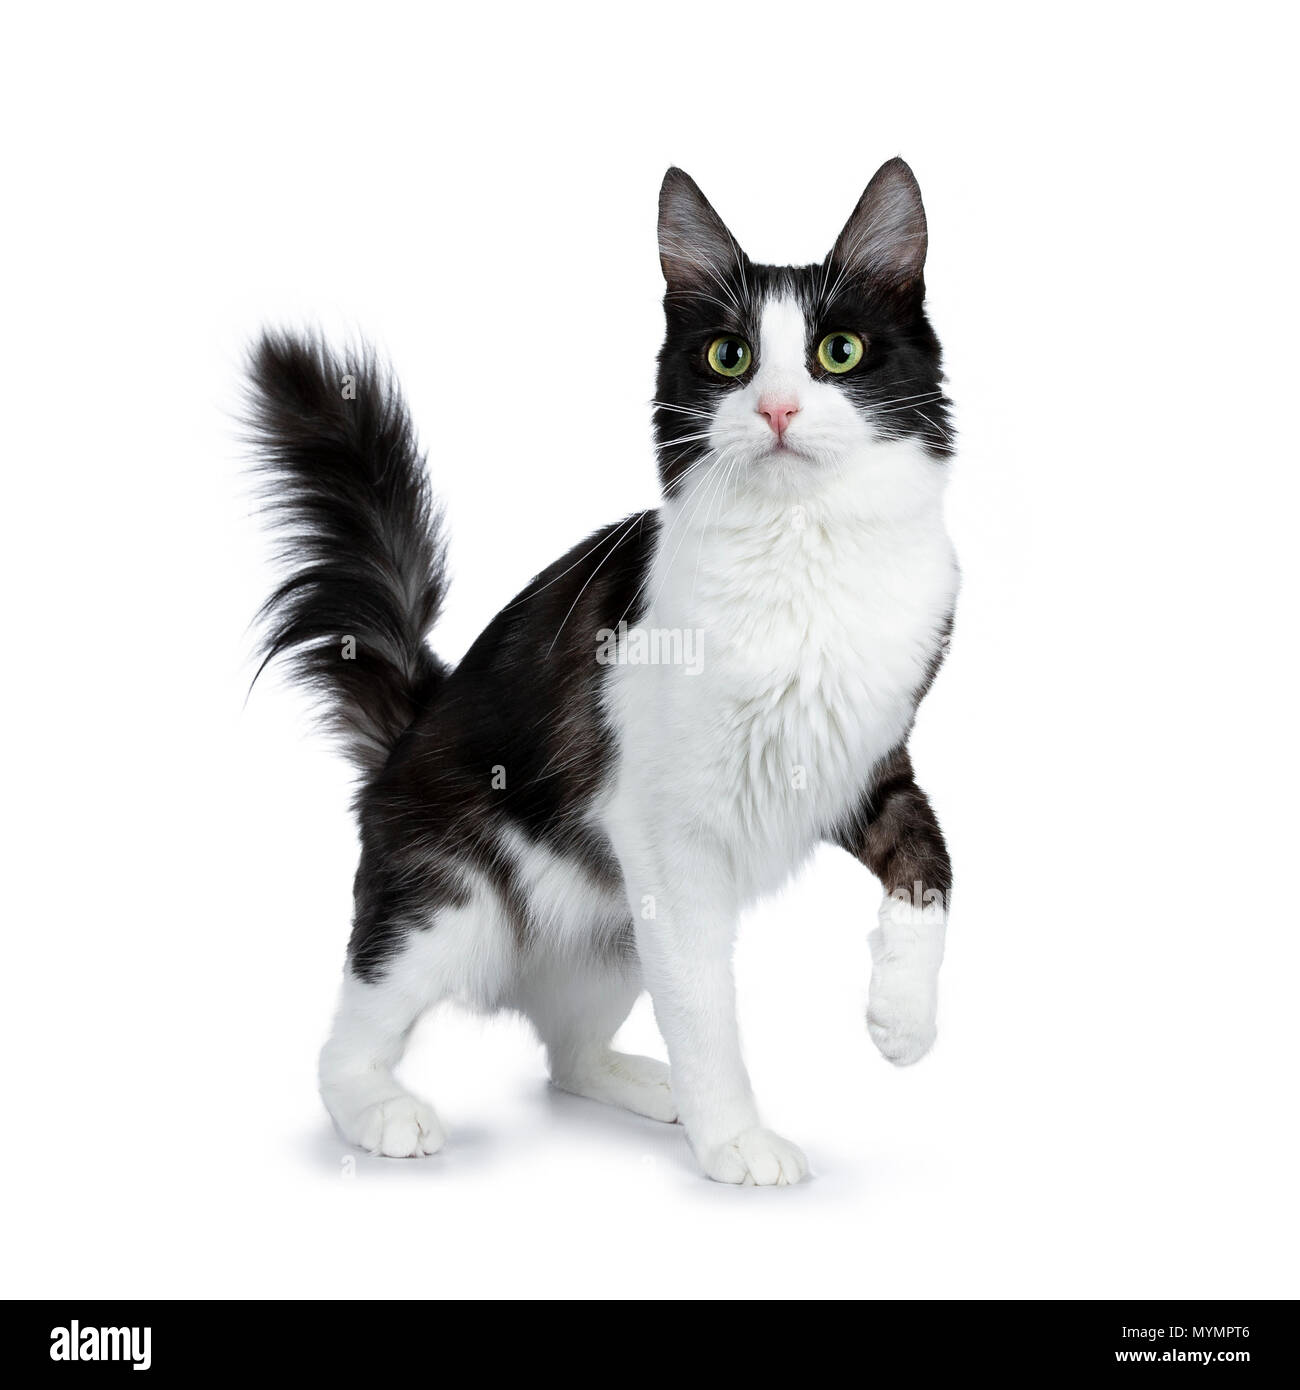 Funny black smoke with white Turkish Angora cat standing isolated on white background with tail in the air and one paw lifted Stock Photo